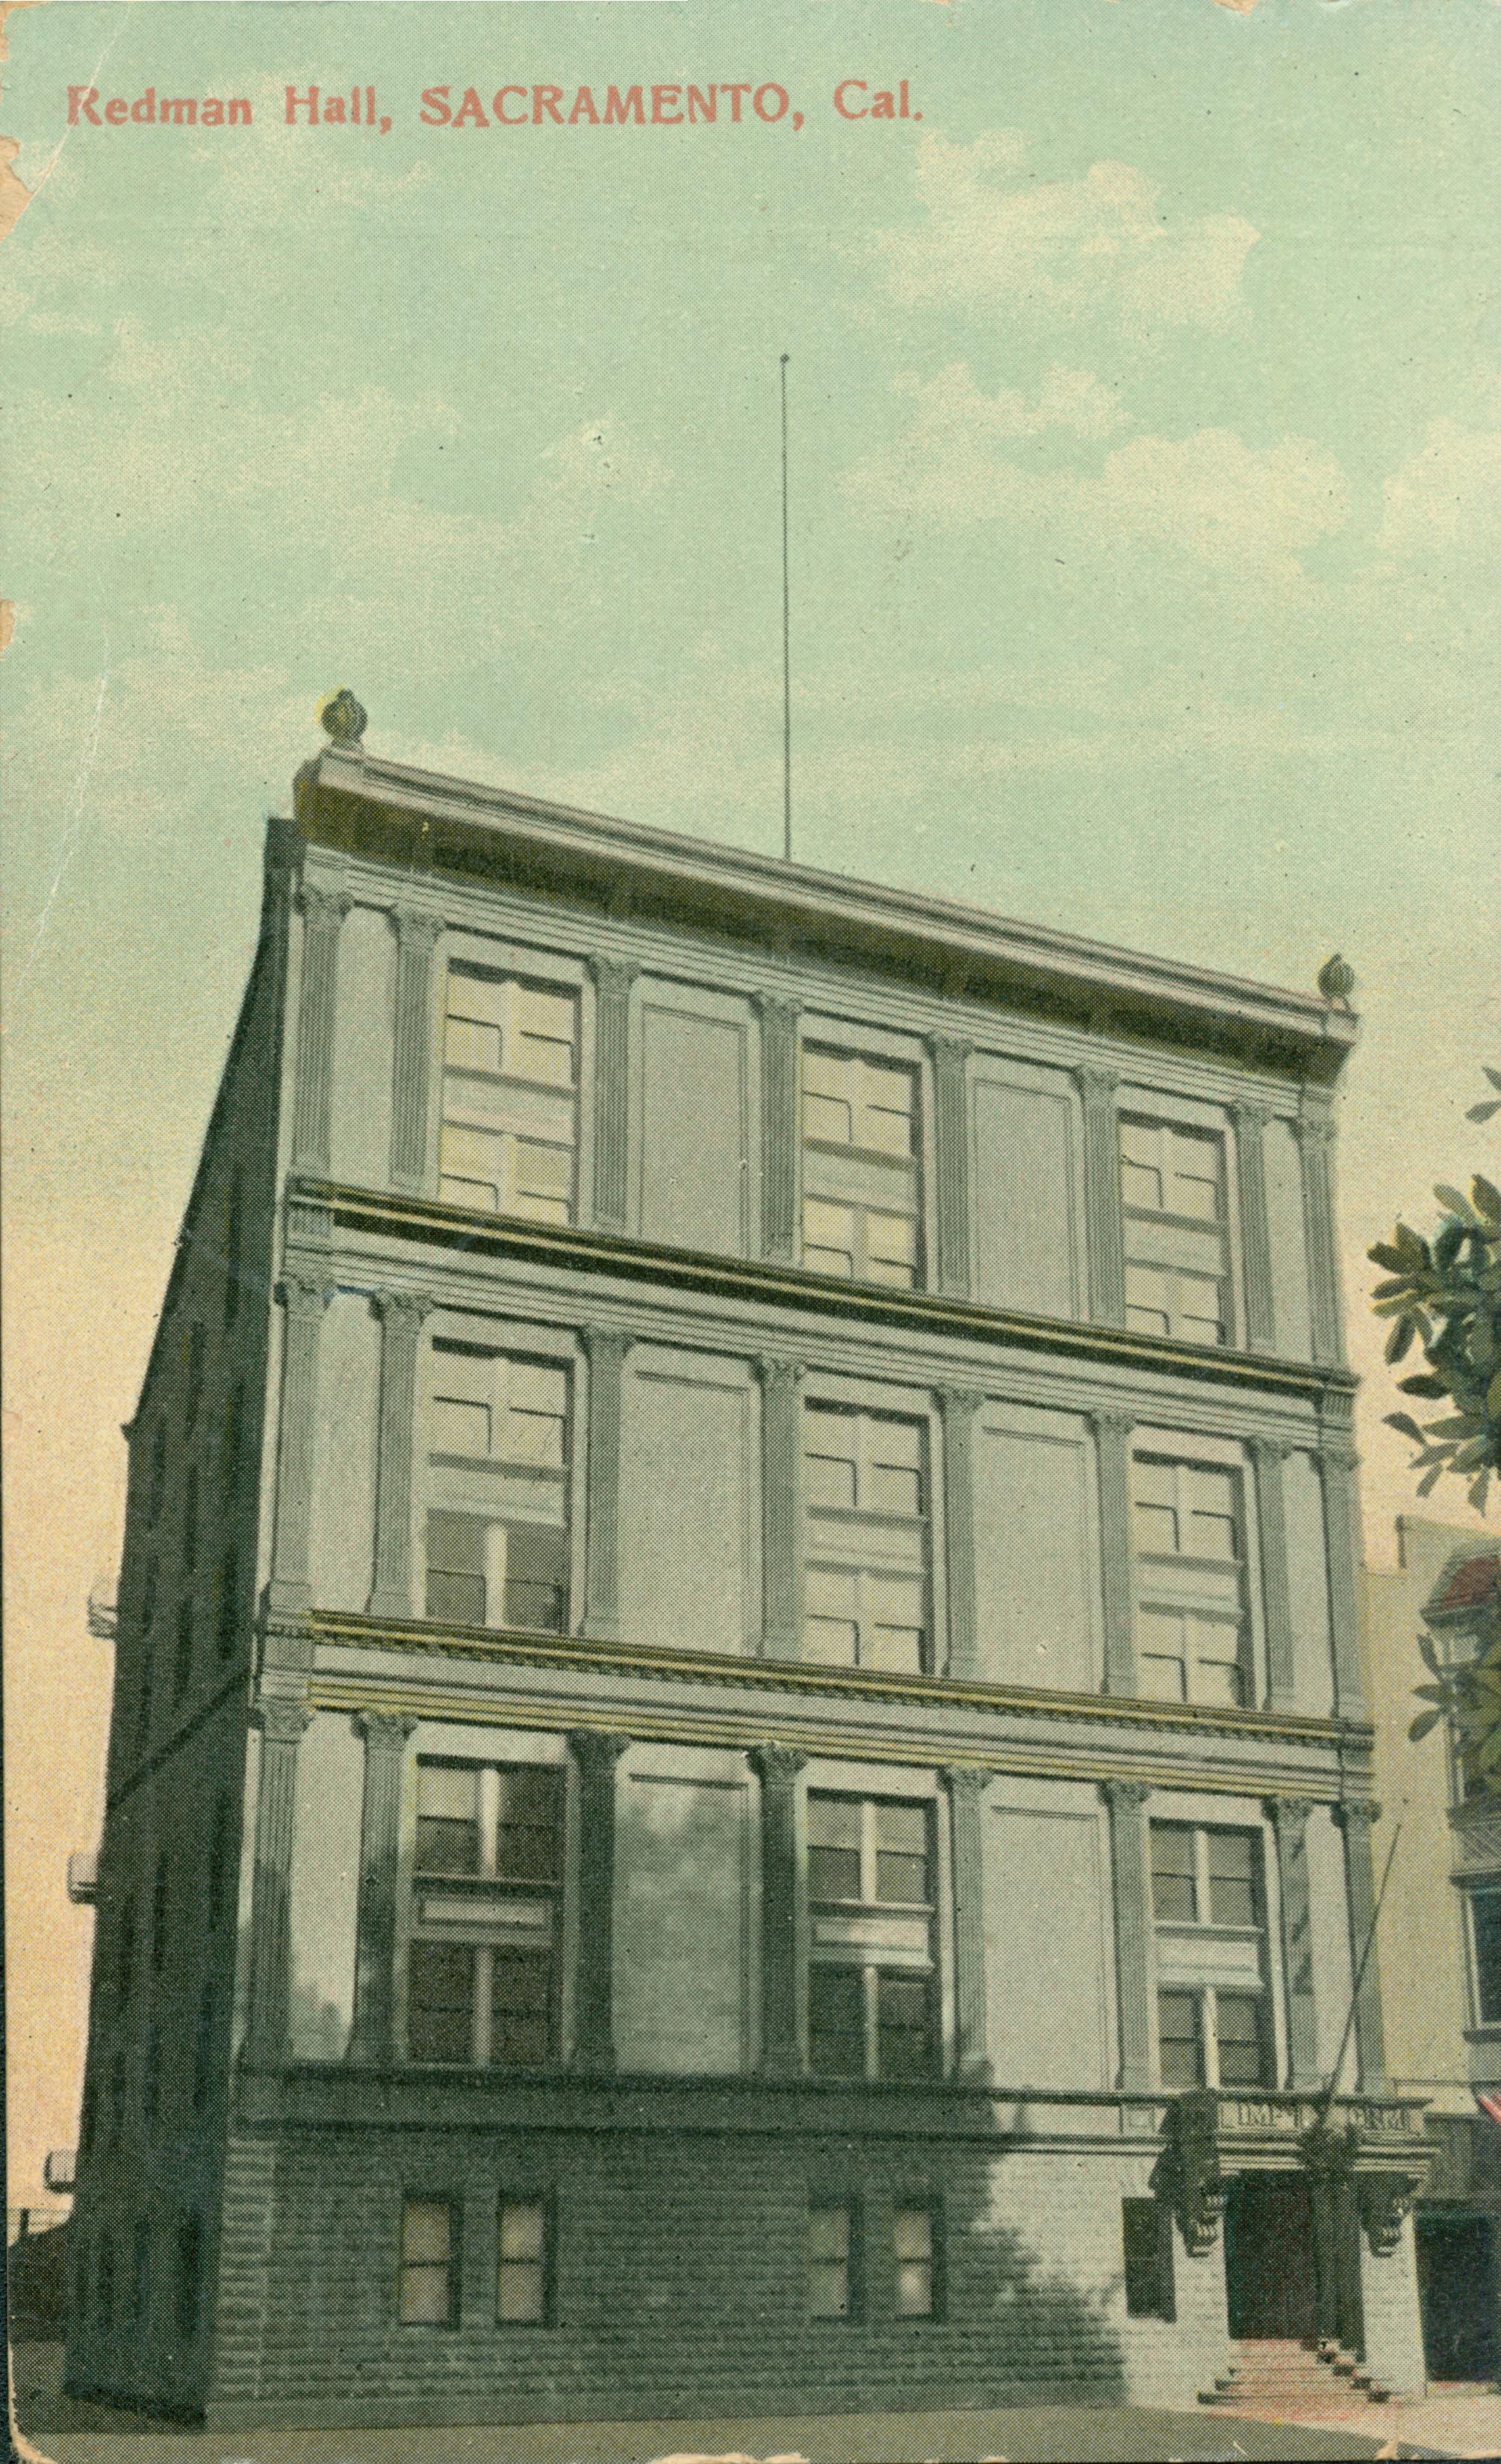 This postcard shows the front façade of Redman Hall